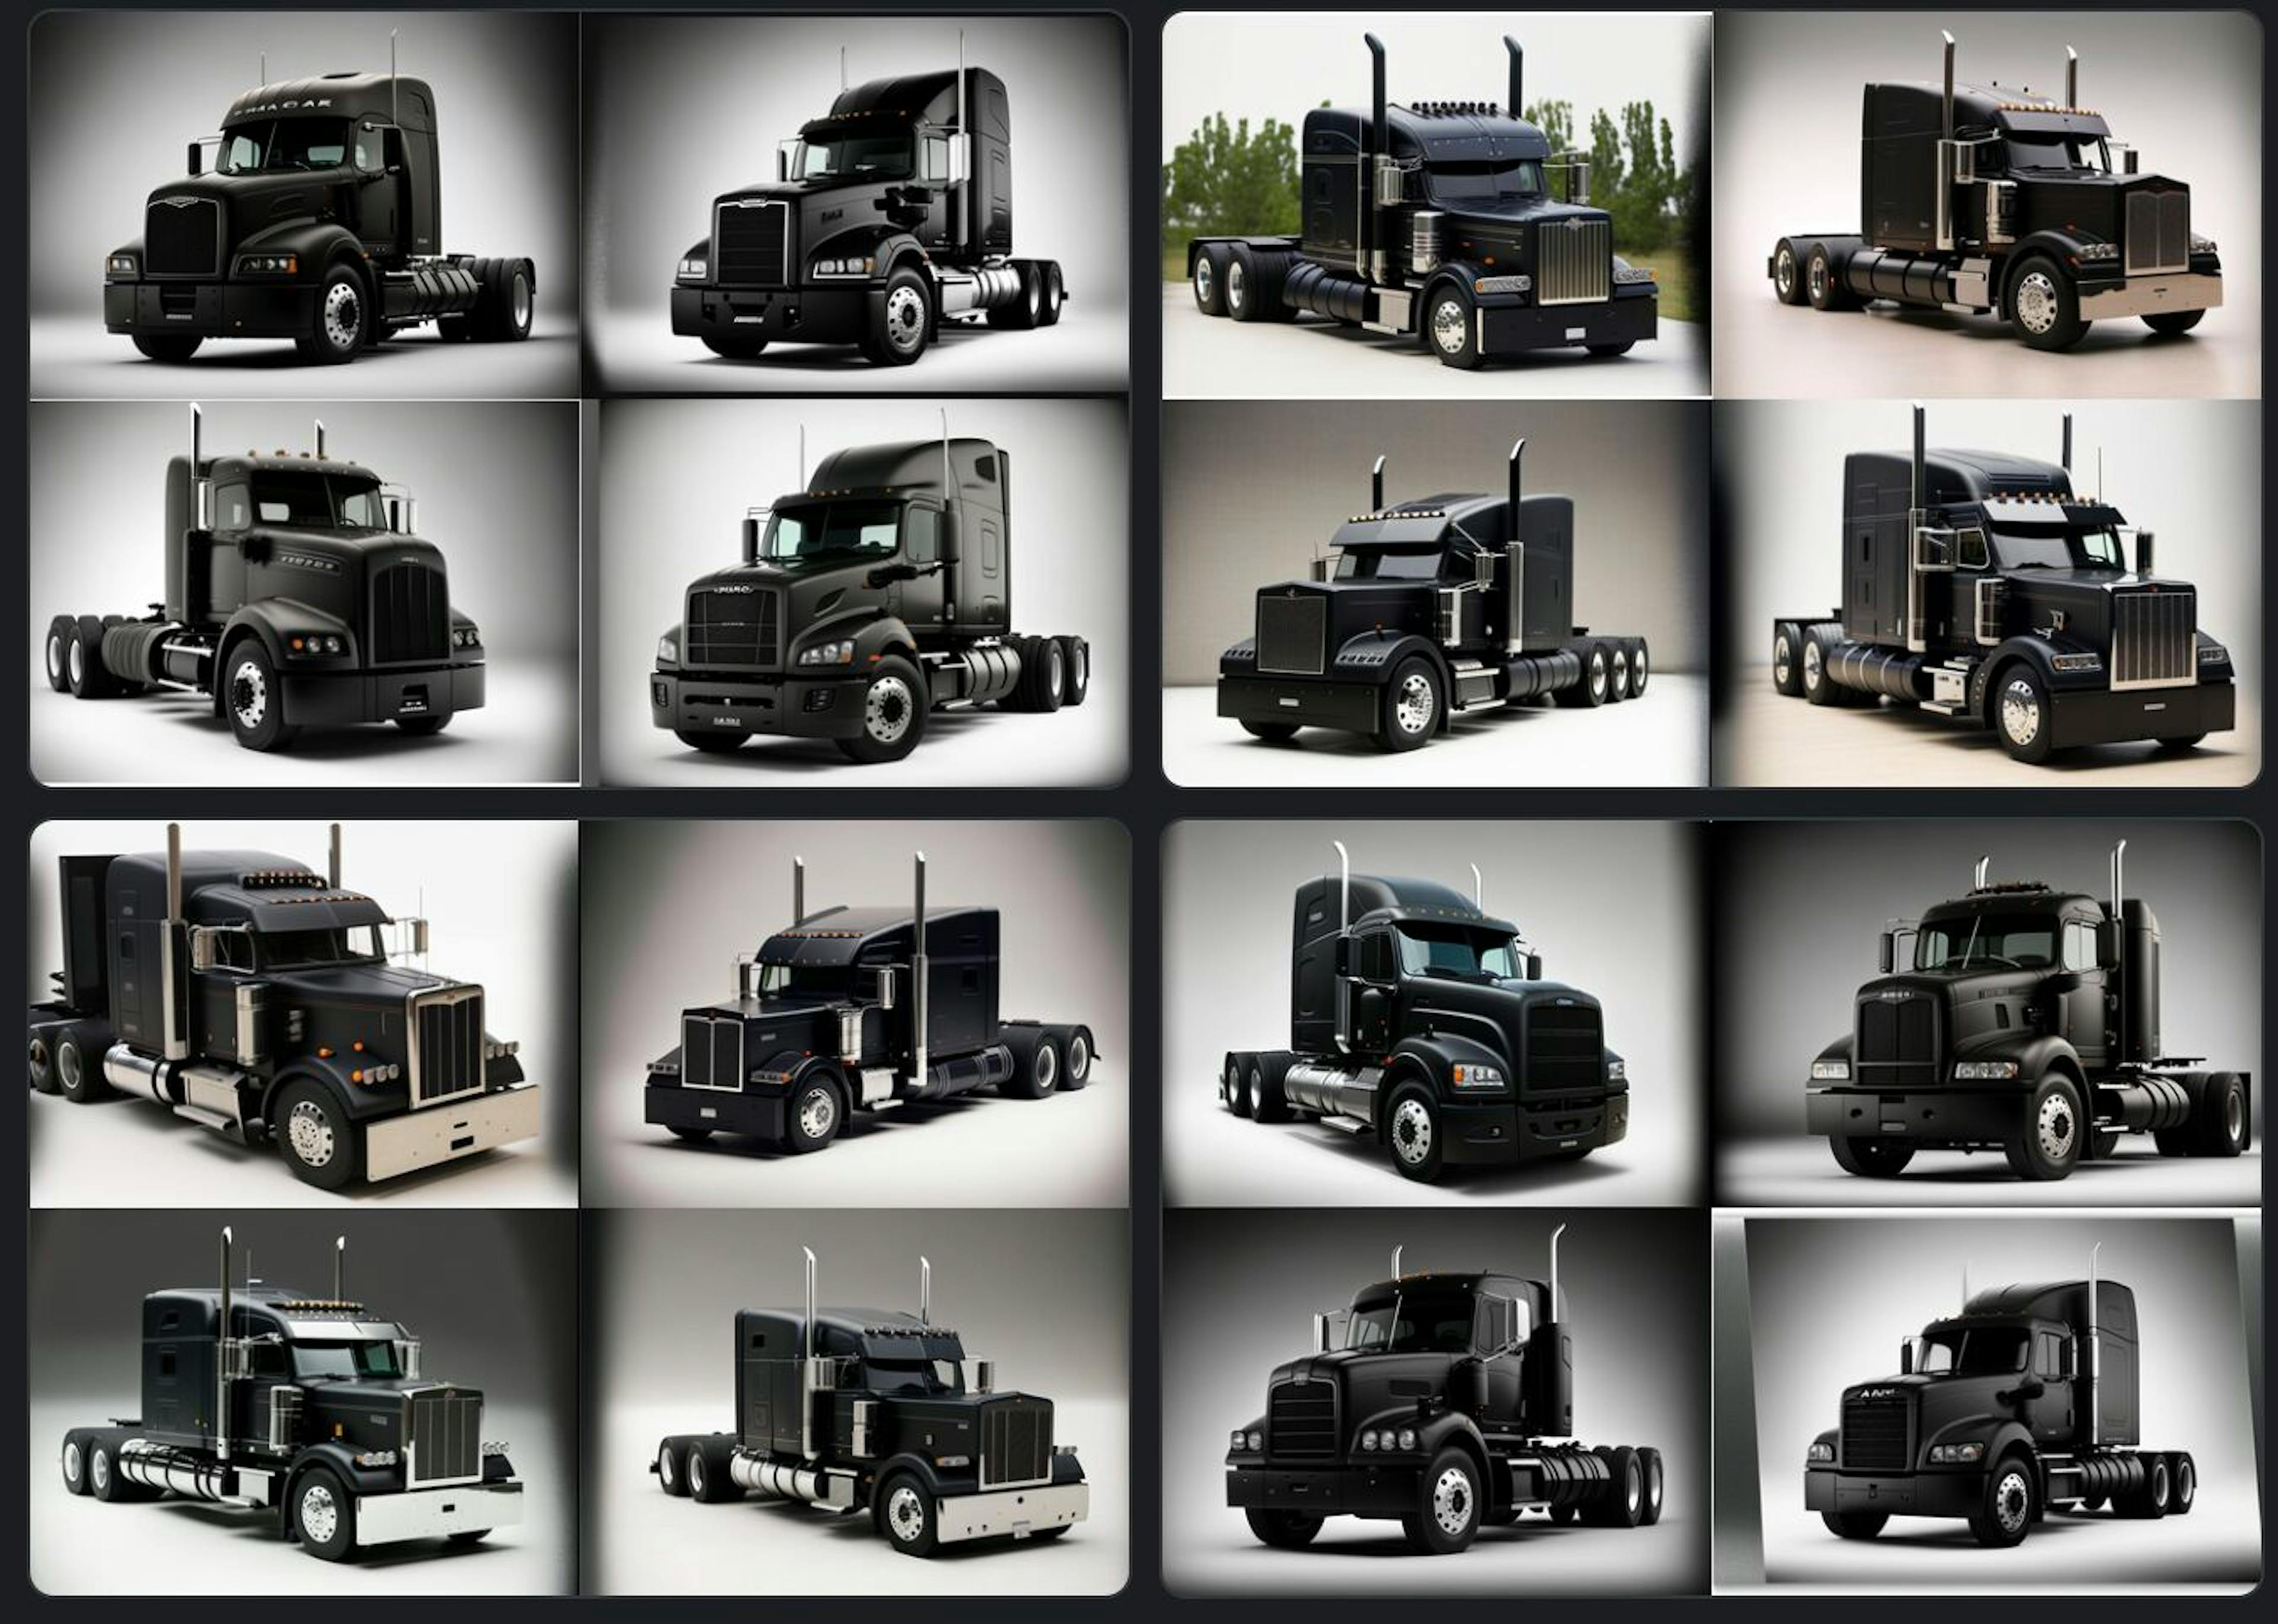 A montage of twelve 3D-rendered semi-trucks against a neutral background, showcasing various models and customizations. Each image captures the trucks in a different pose, highlighting their sleek designs, from classic black and chrome finishes to more modern looks with streamlined aesthetics. The trucks are depicted with a high level of detail, showcasing reflective surfaces, intricate lighting, and the muscular build typical of such heavy-duty vehicles